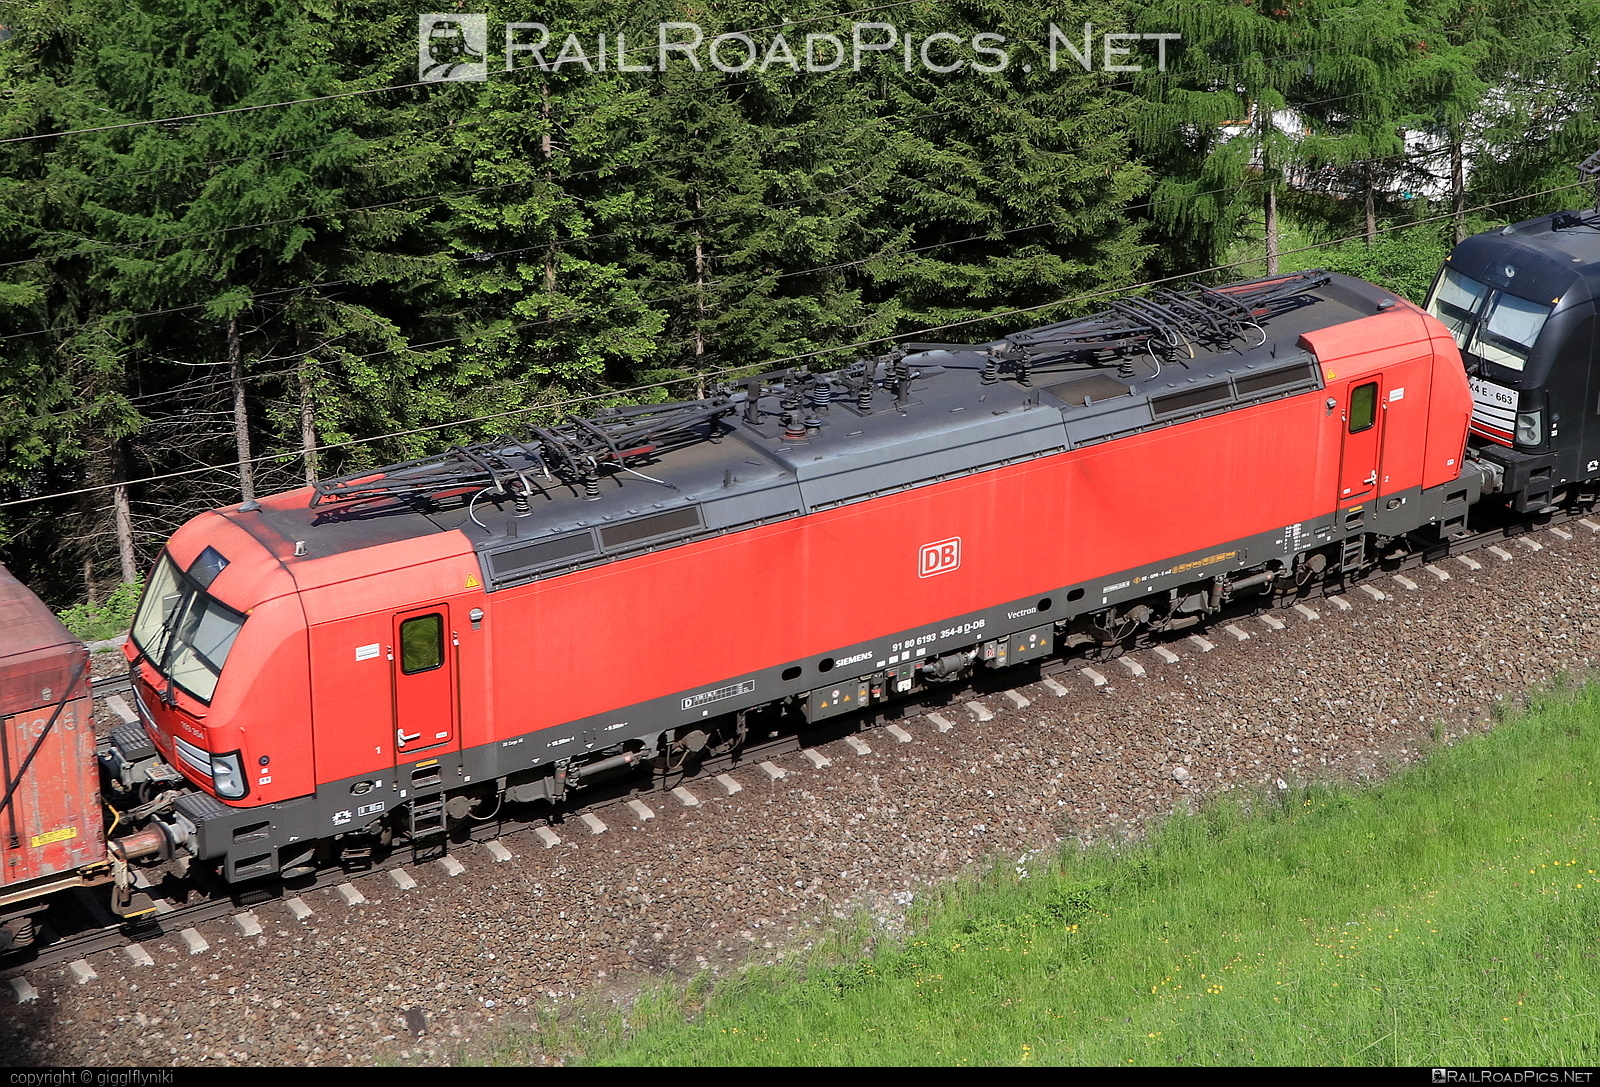 Siemens Vectron MS - 193 354 operated by DB Cargo AG #db #dbcargo #dbcargoag #deutschebahn #siemens #siemensVectron #siemensVectronMS #vectron #vectronMS